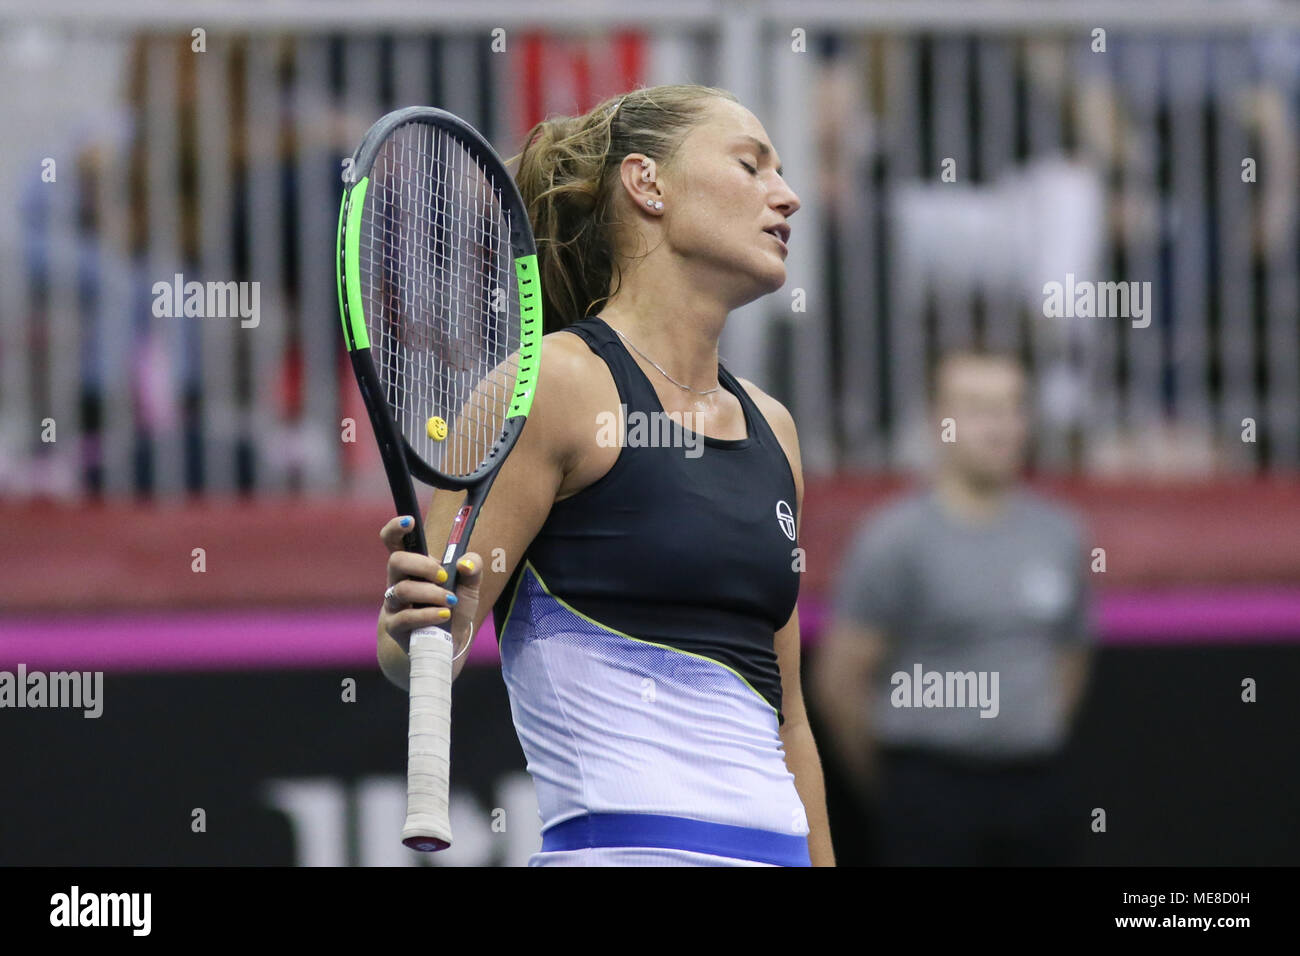 Montreal, Canada, 21 April 2018. Kateryna Bondarenko of the Ukraine reacts after missing a point against against Eugenie Bouchard of Canada during their Fed Cup World Group II play-off tennis match in Montreal, Quebec, Canada on Saturday, April 21, 2018. Credit: Dario Ayala/Alamy Live News Stock Photo